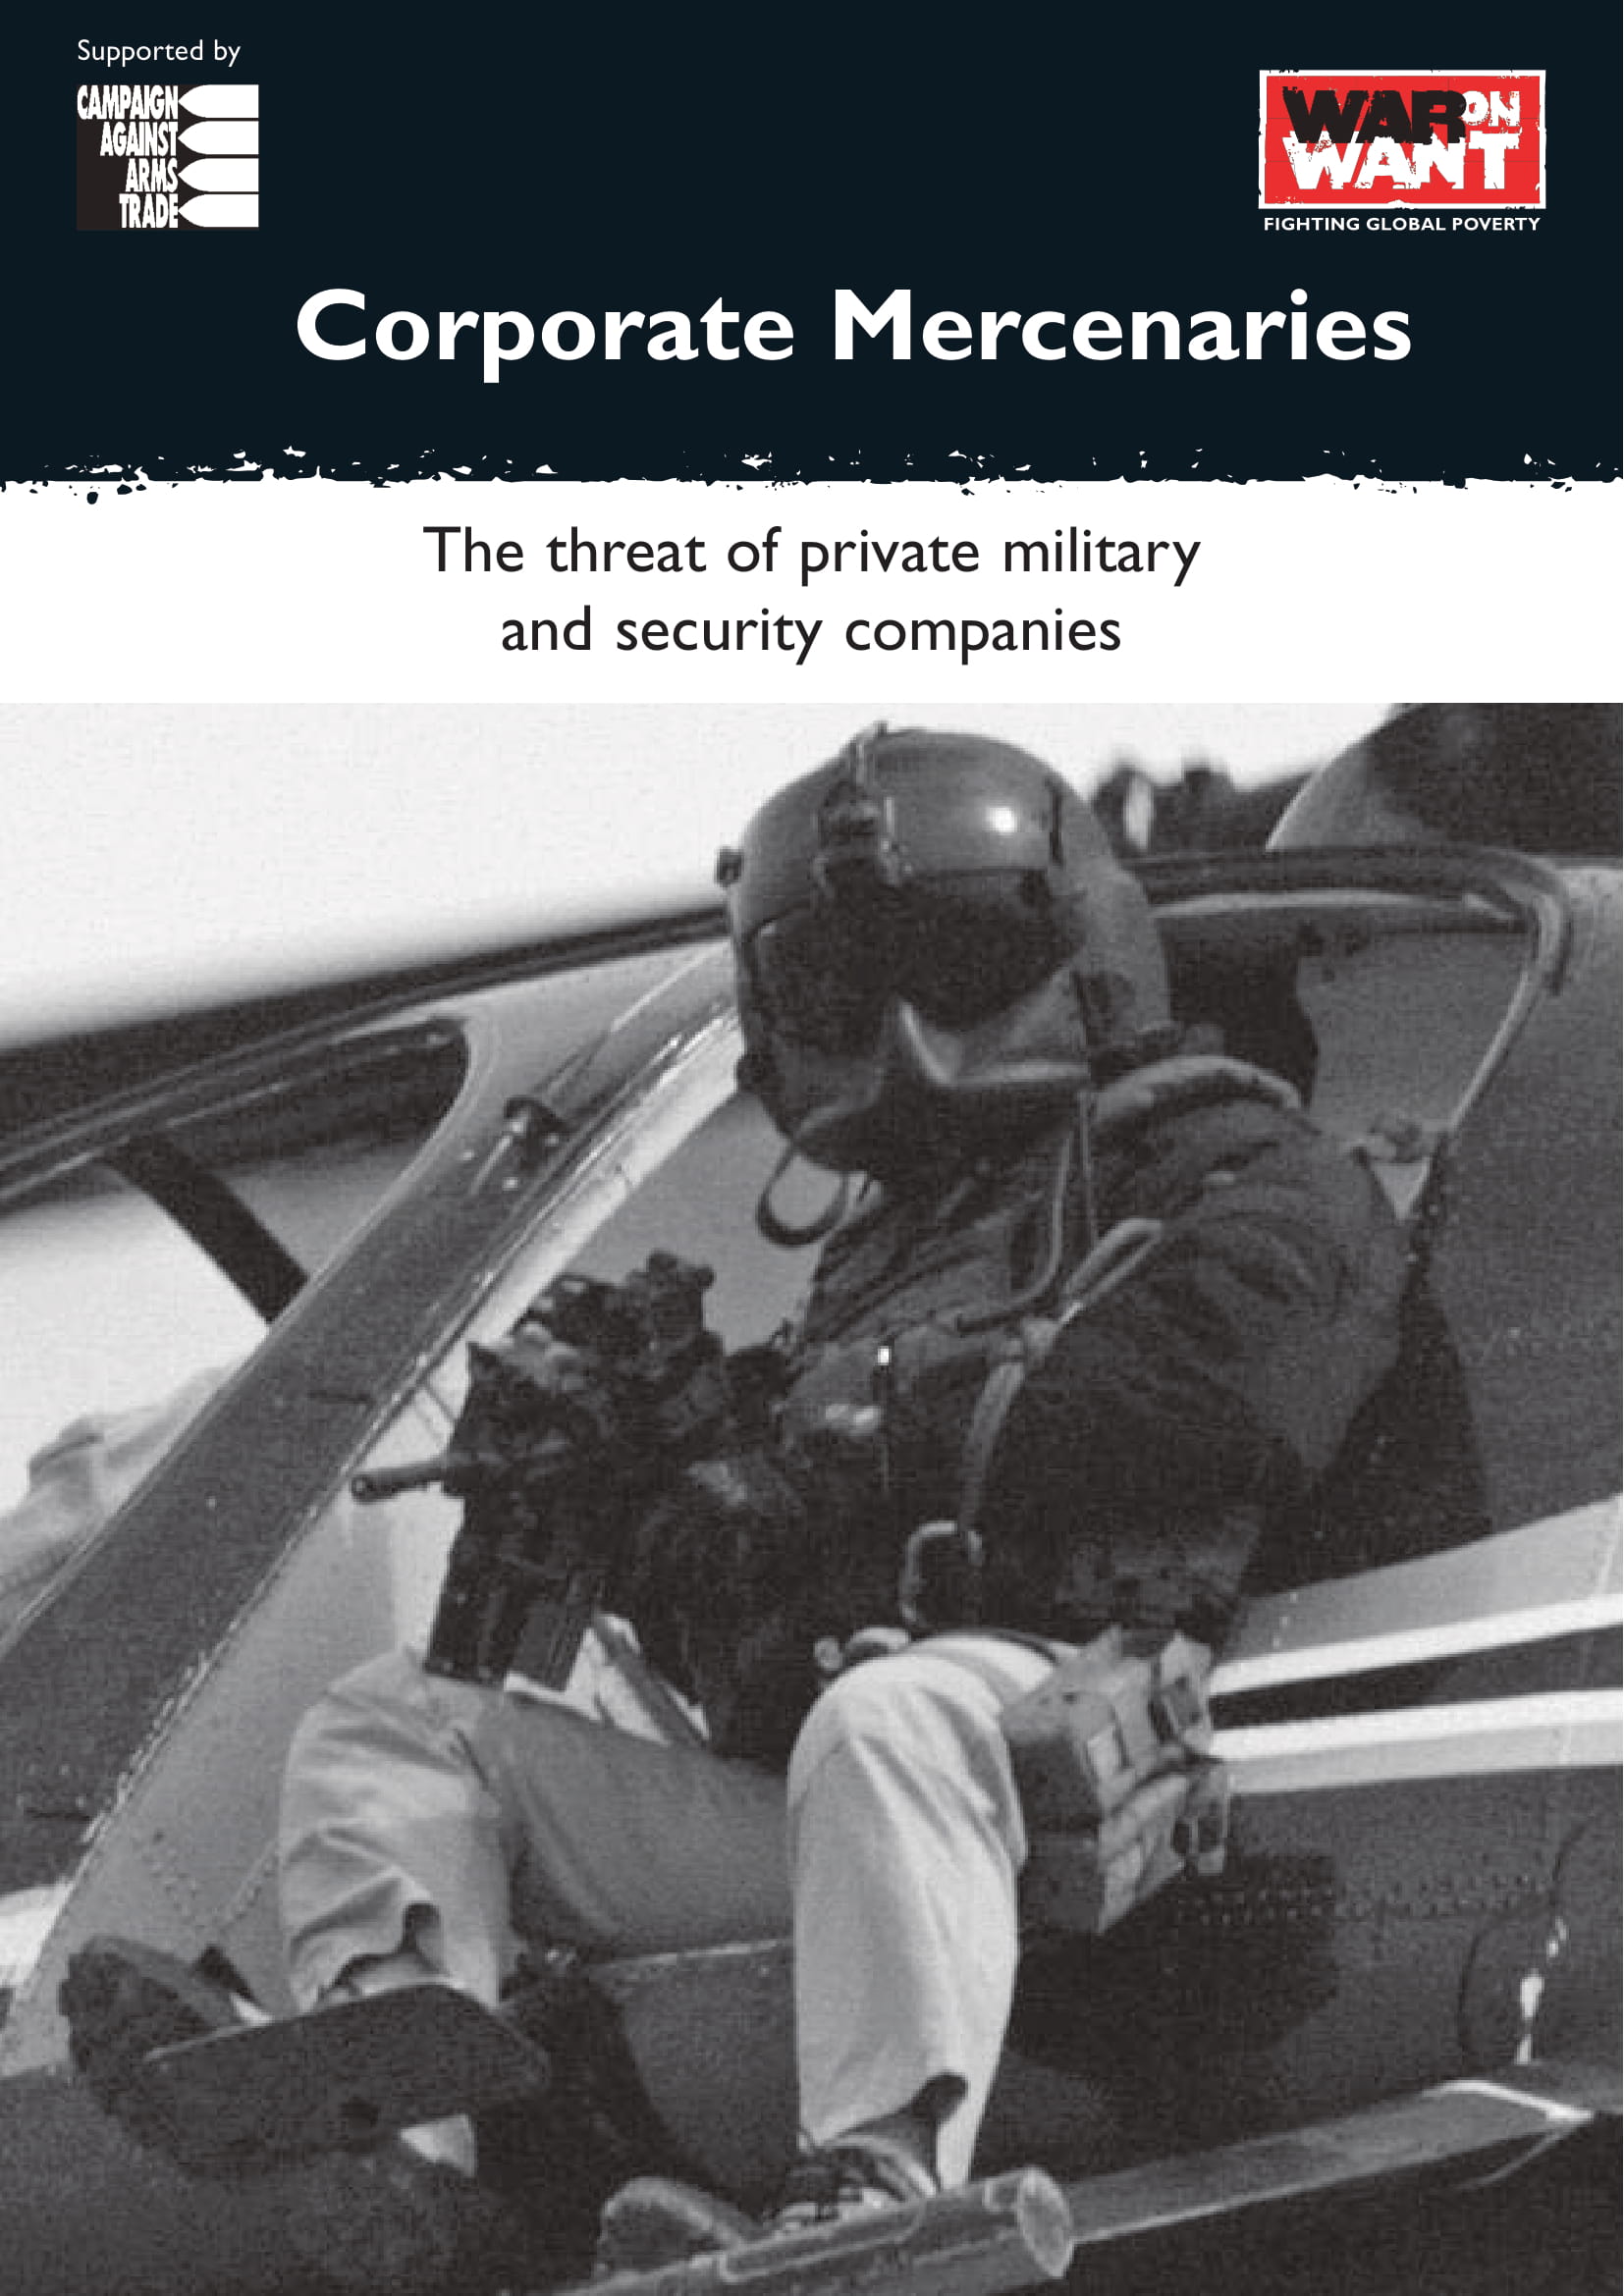 Text reads Corporate Mercenaries - the threat of private military and security companies. The image shows a person in an unmarked helmet and bulletproof vest leaning out of a helicopter with a gun.